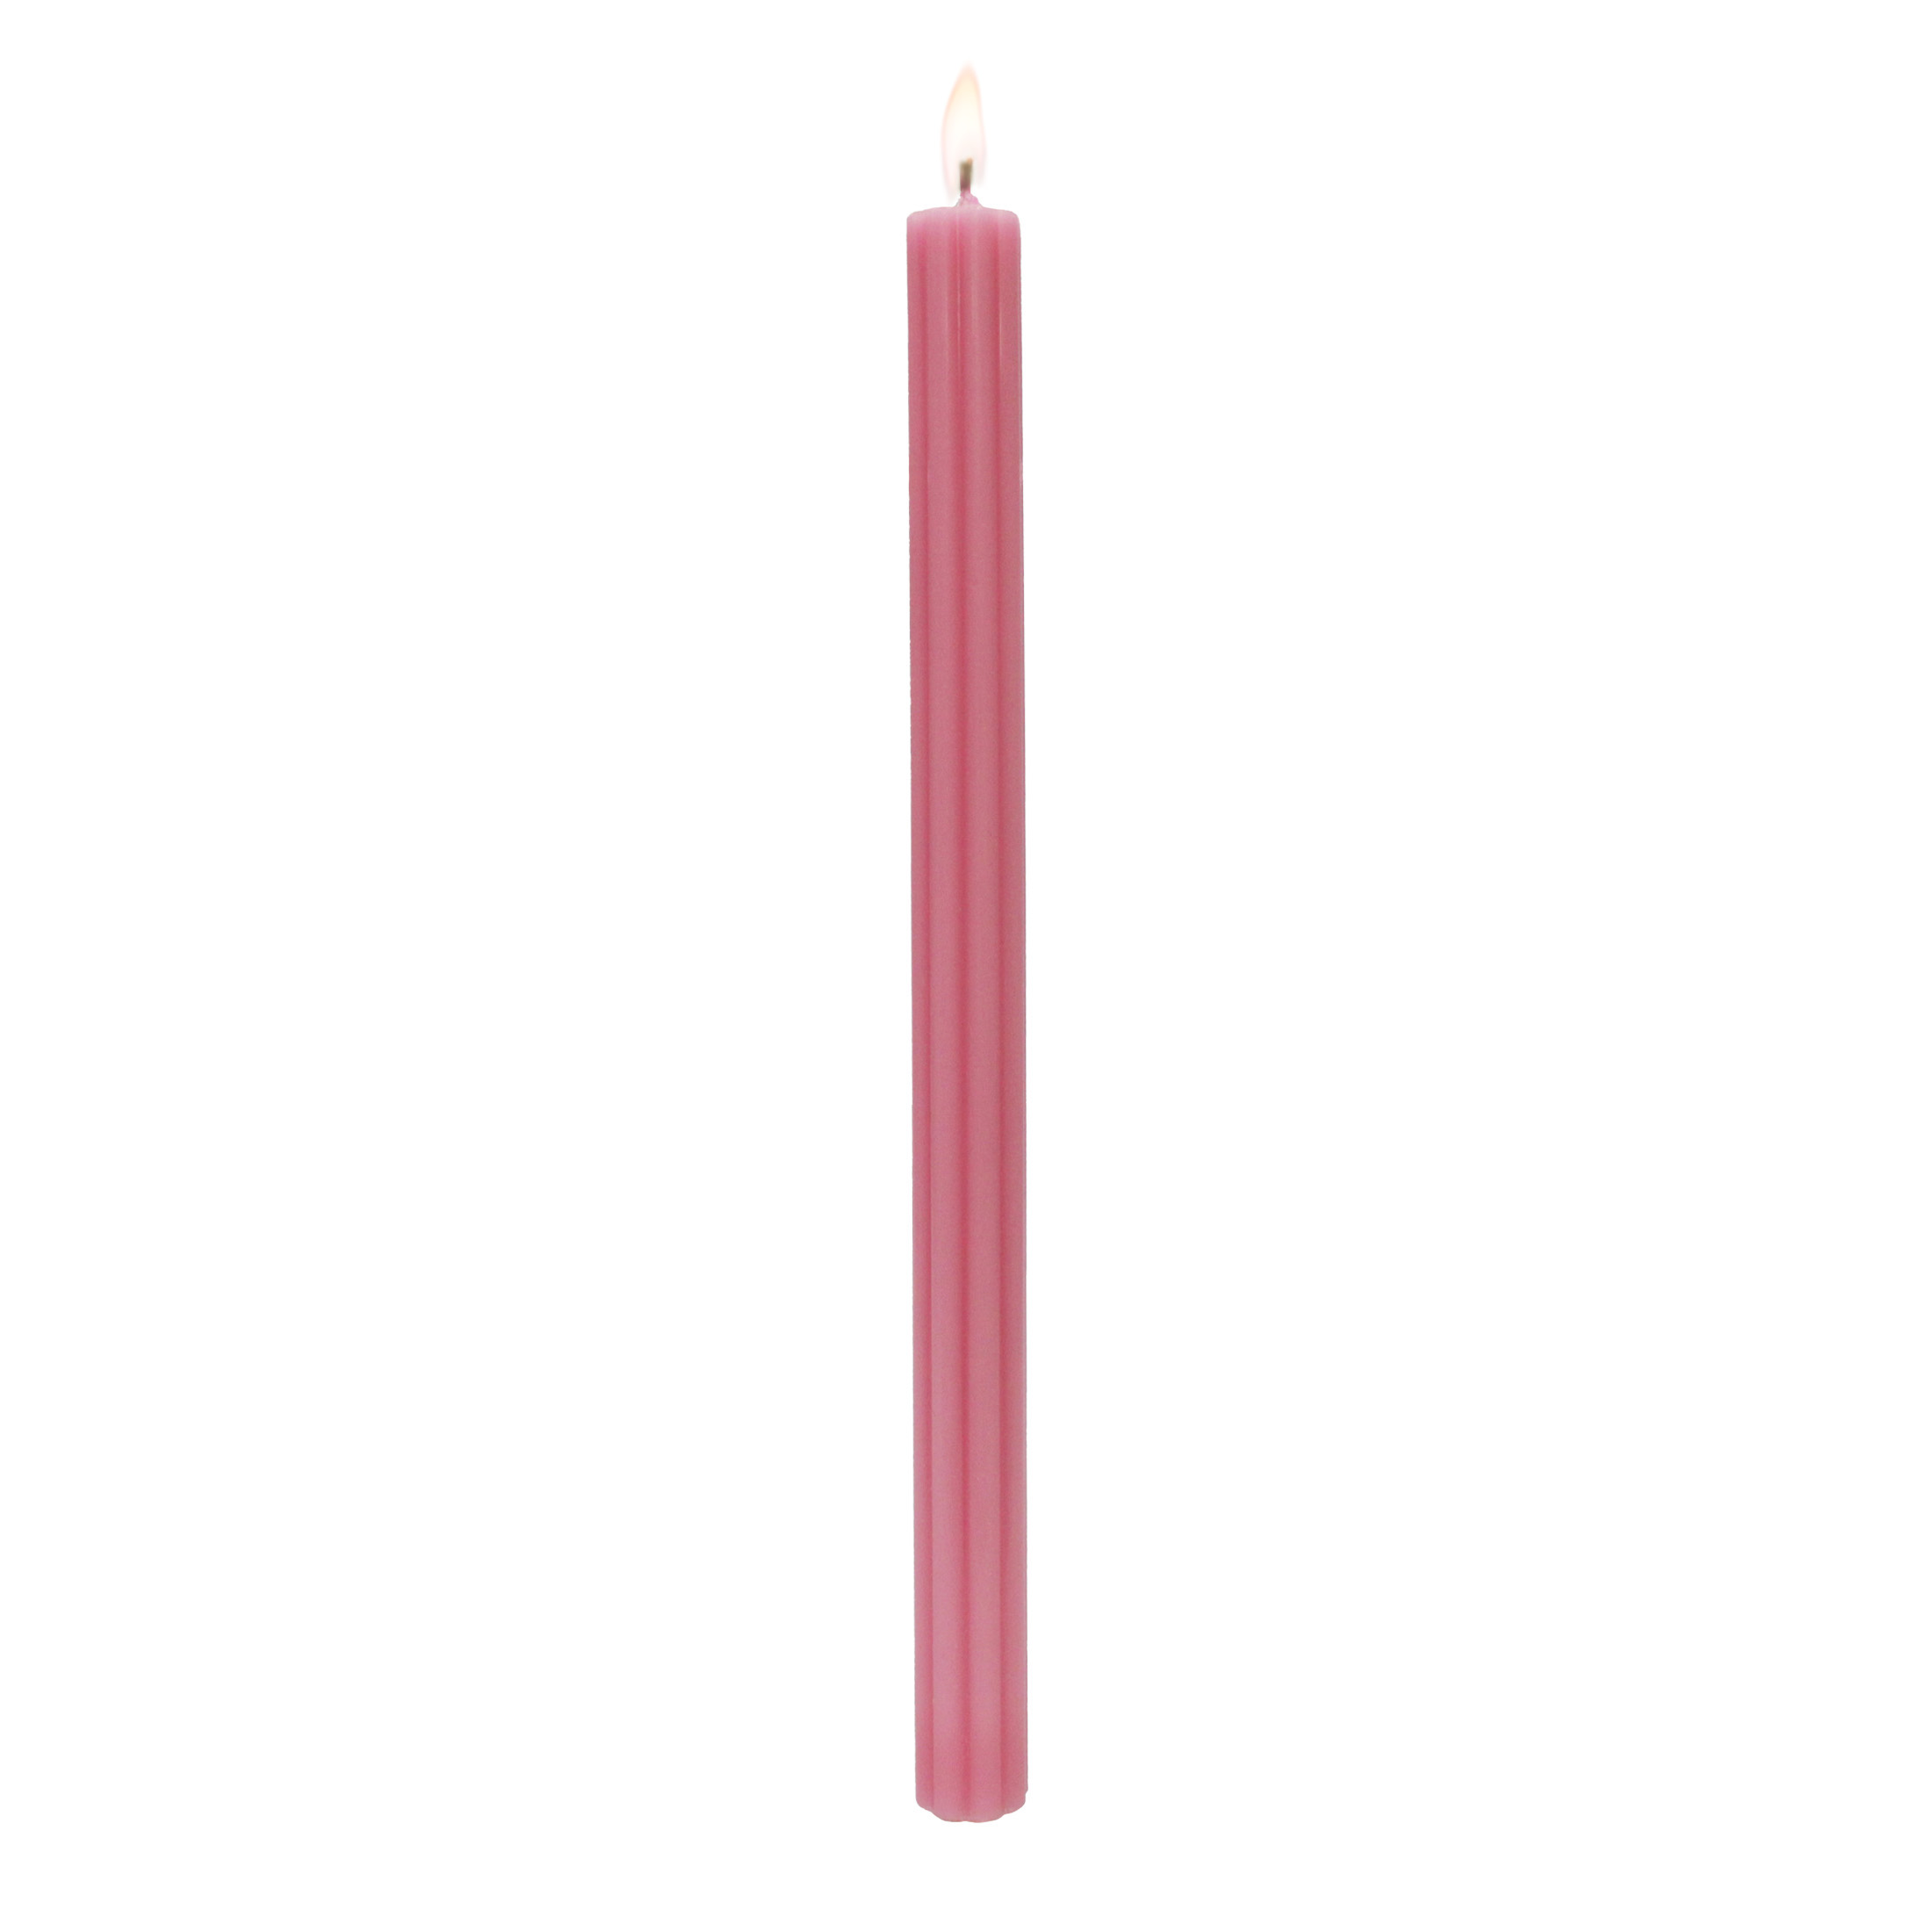 Better Homes & Gardens Unscented Taper Candles, Pink, 2-Pack, 11 inches Height - image 5 of 5